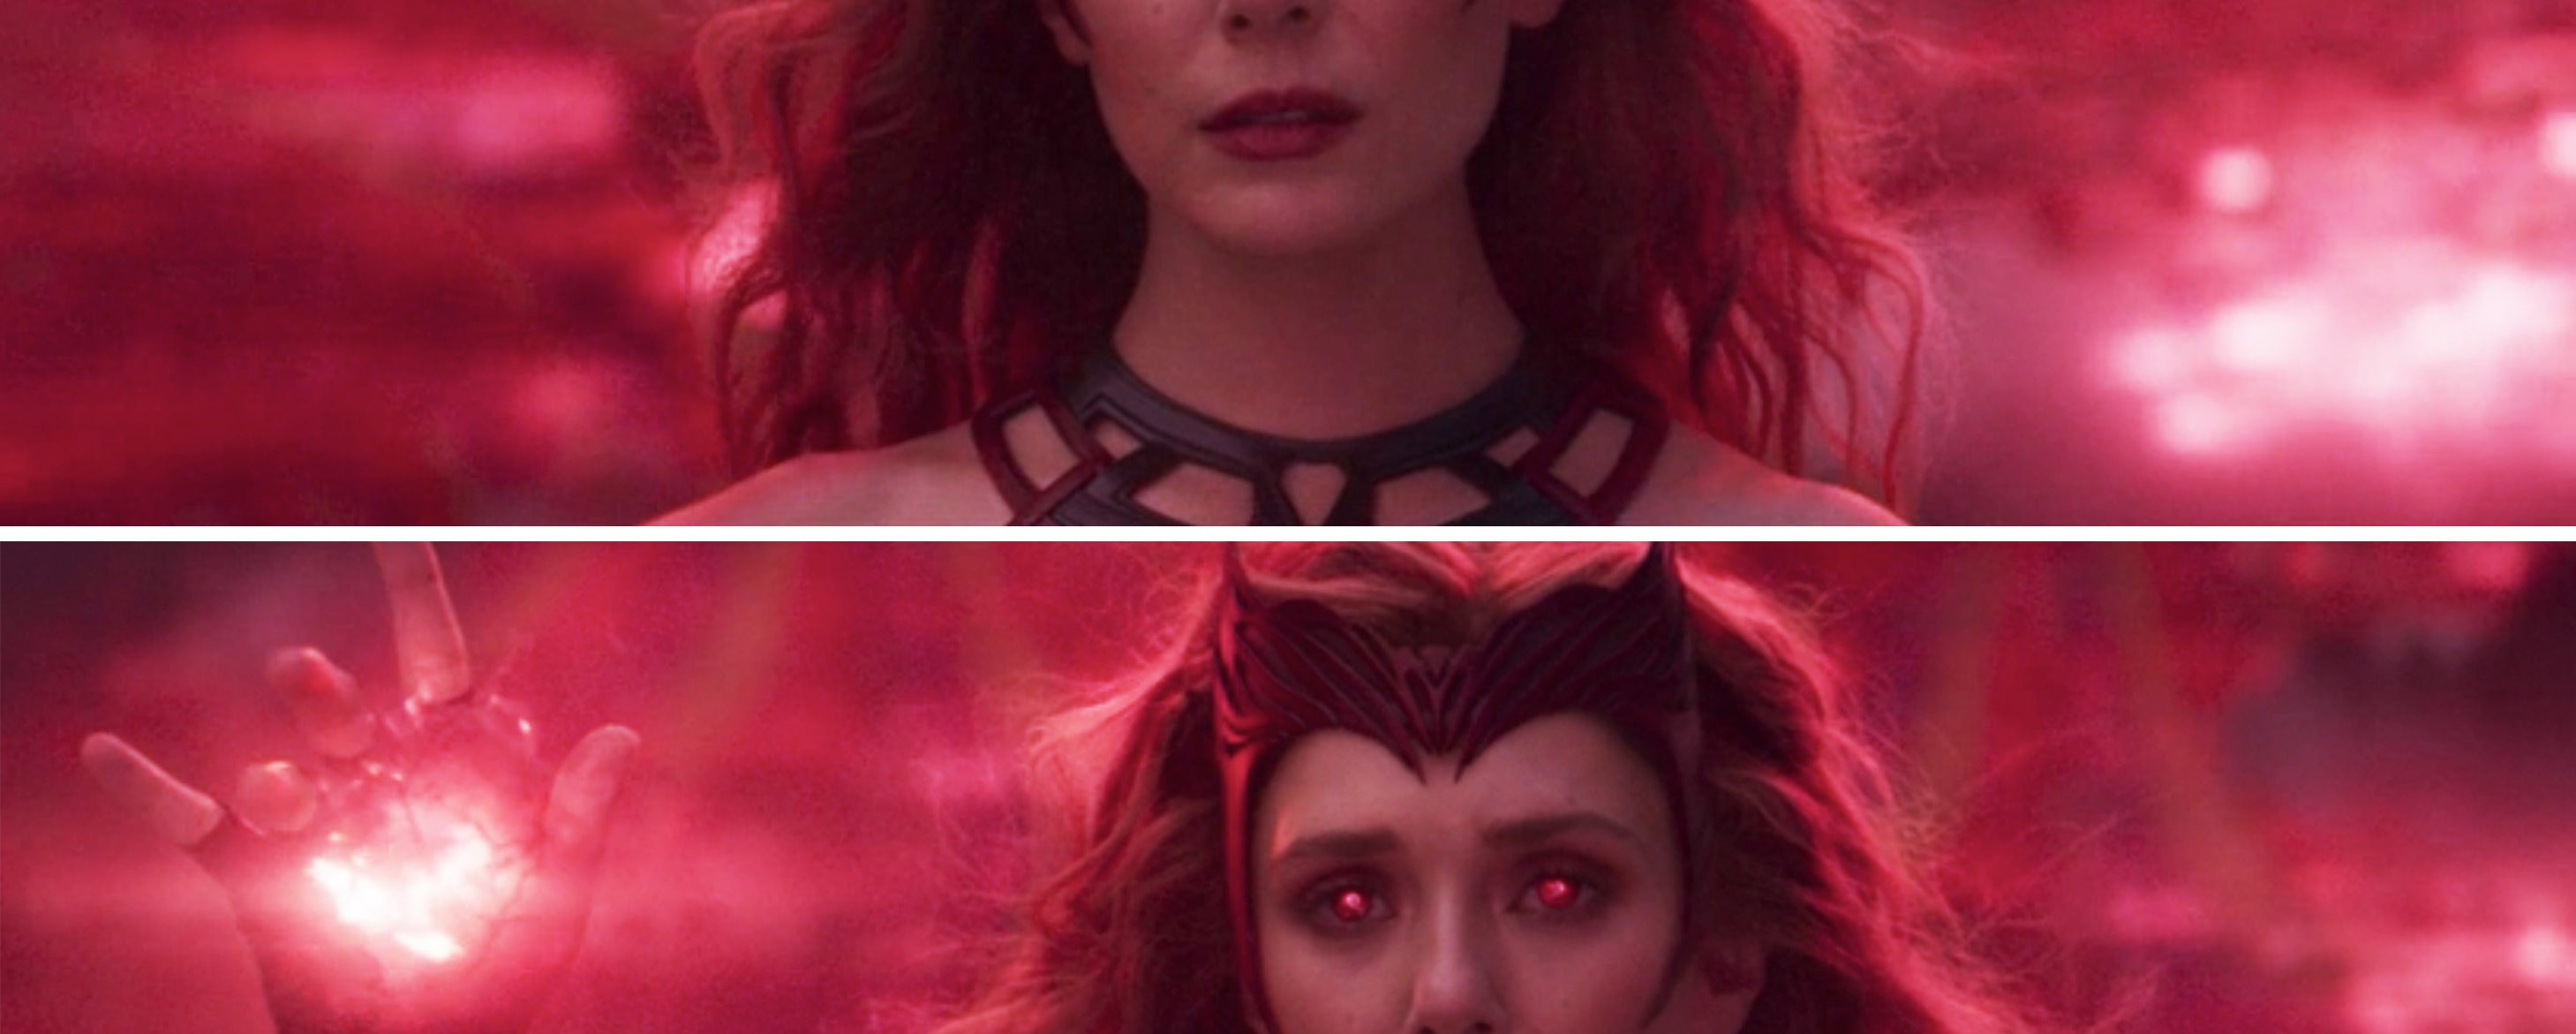 Wanda in her Scarlet Witch outfit